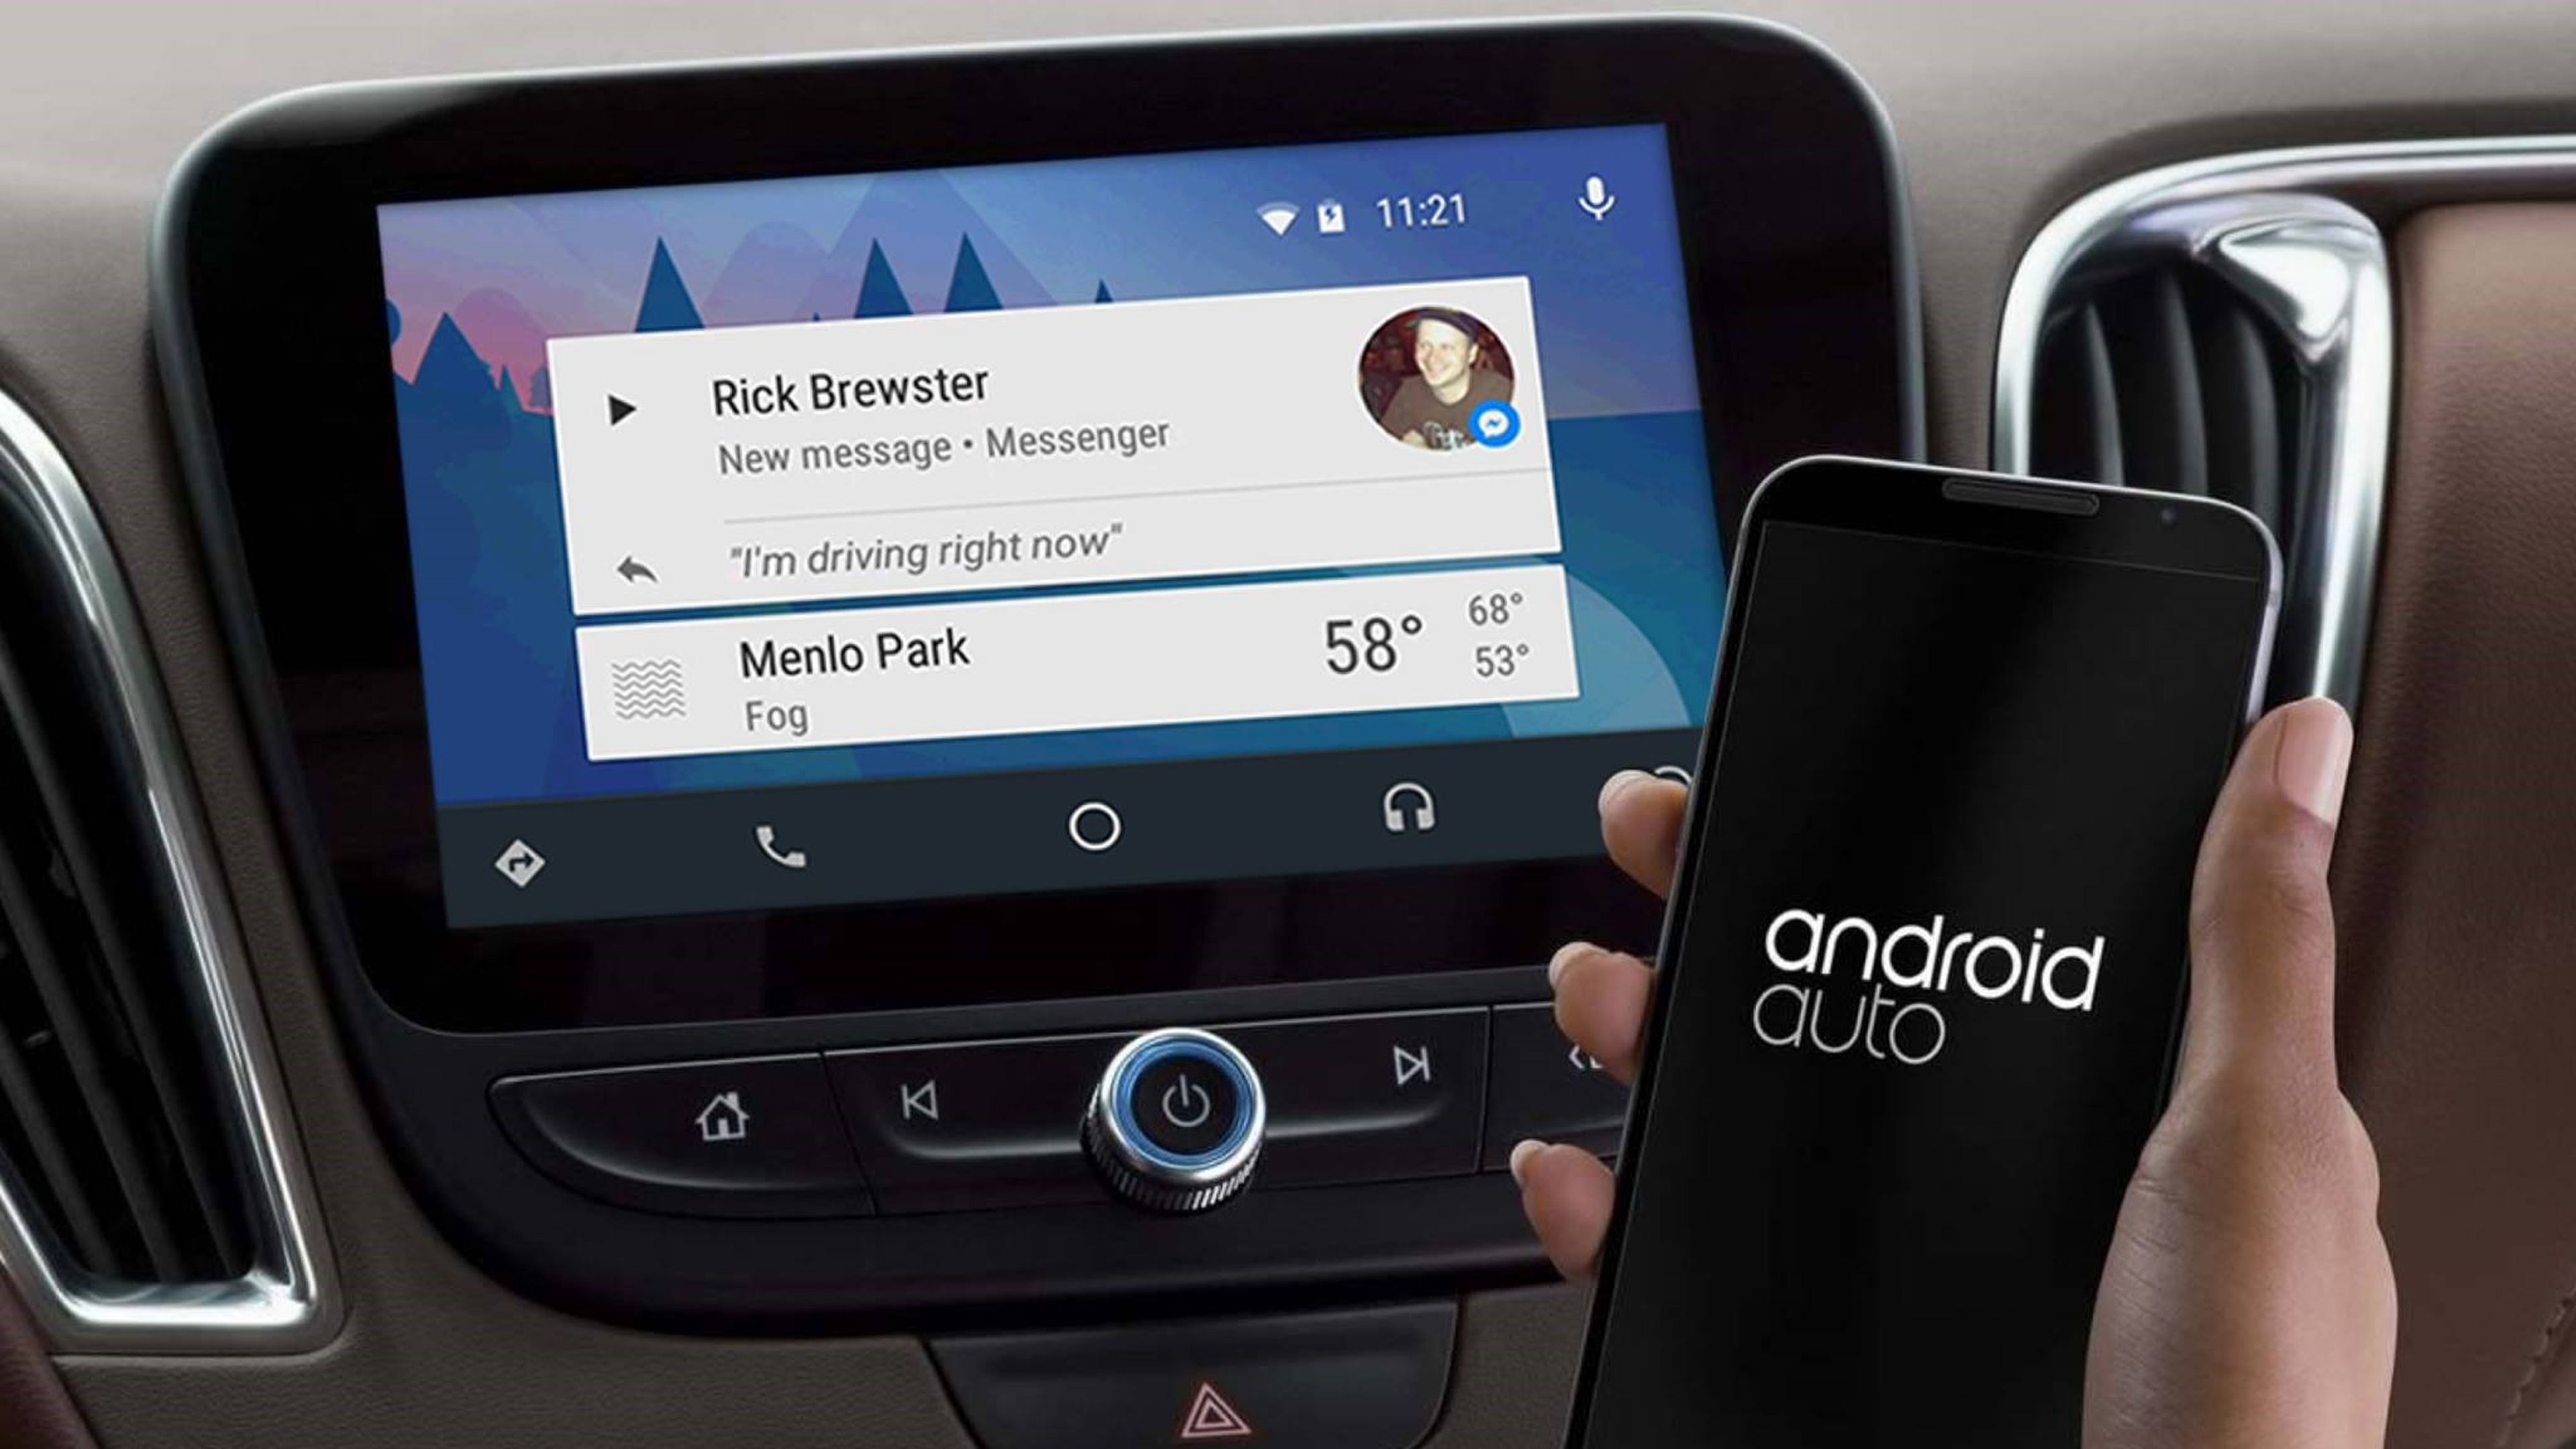 Messenger Android Auto